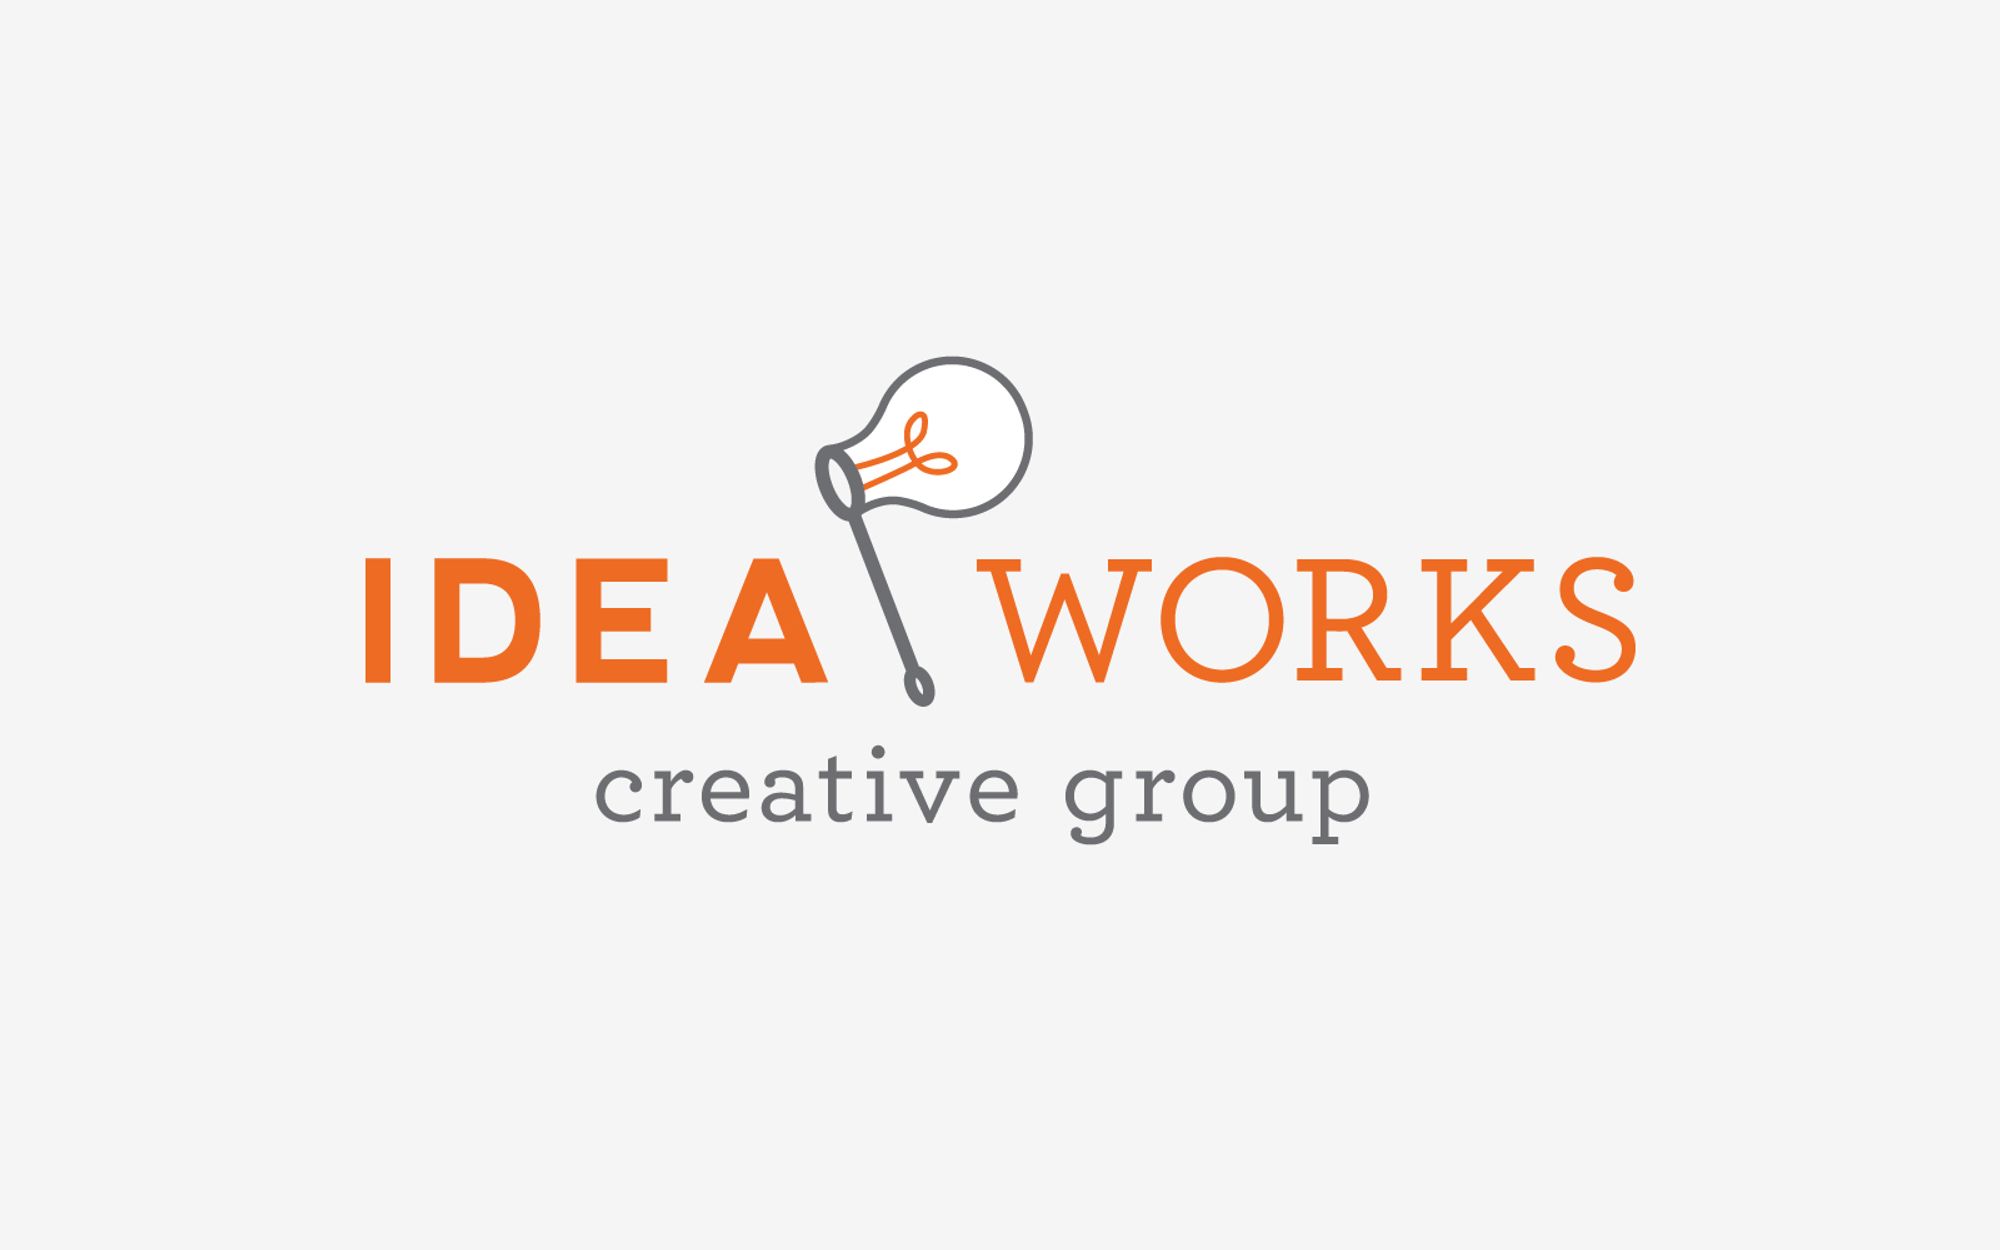 Identity design for IdeaWorks Creative Group